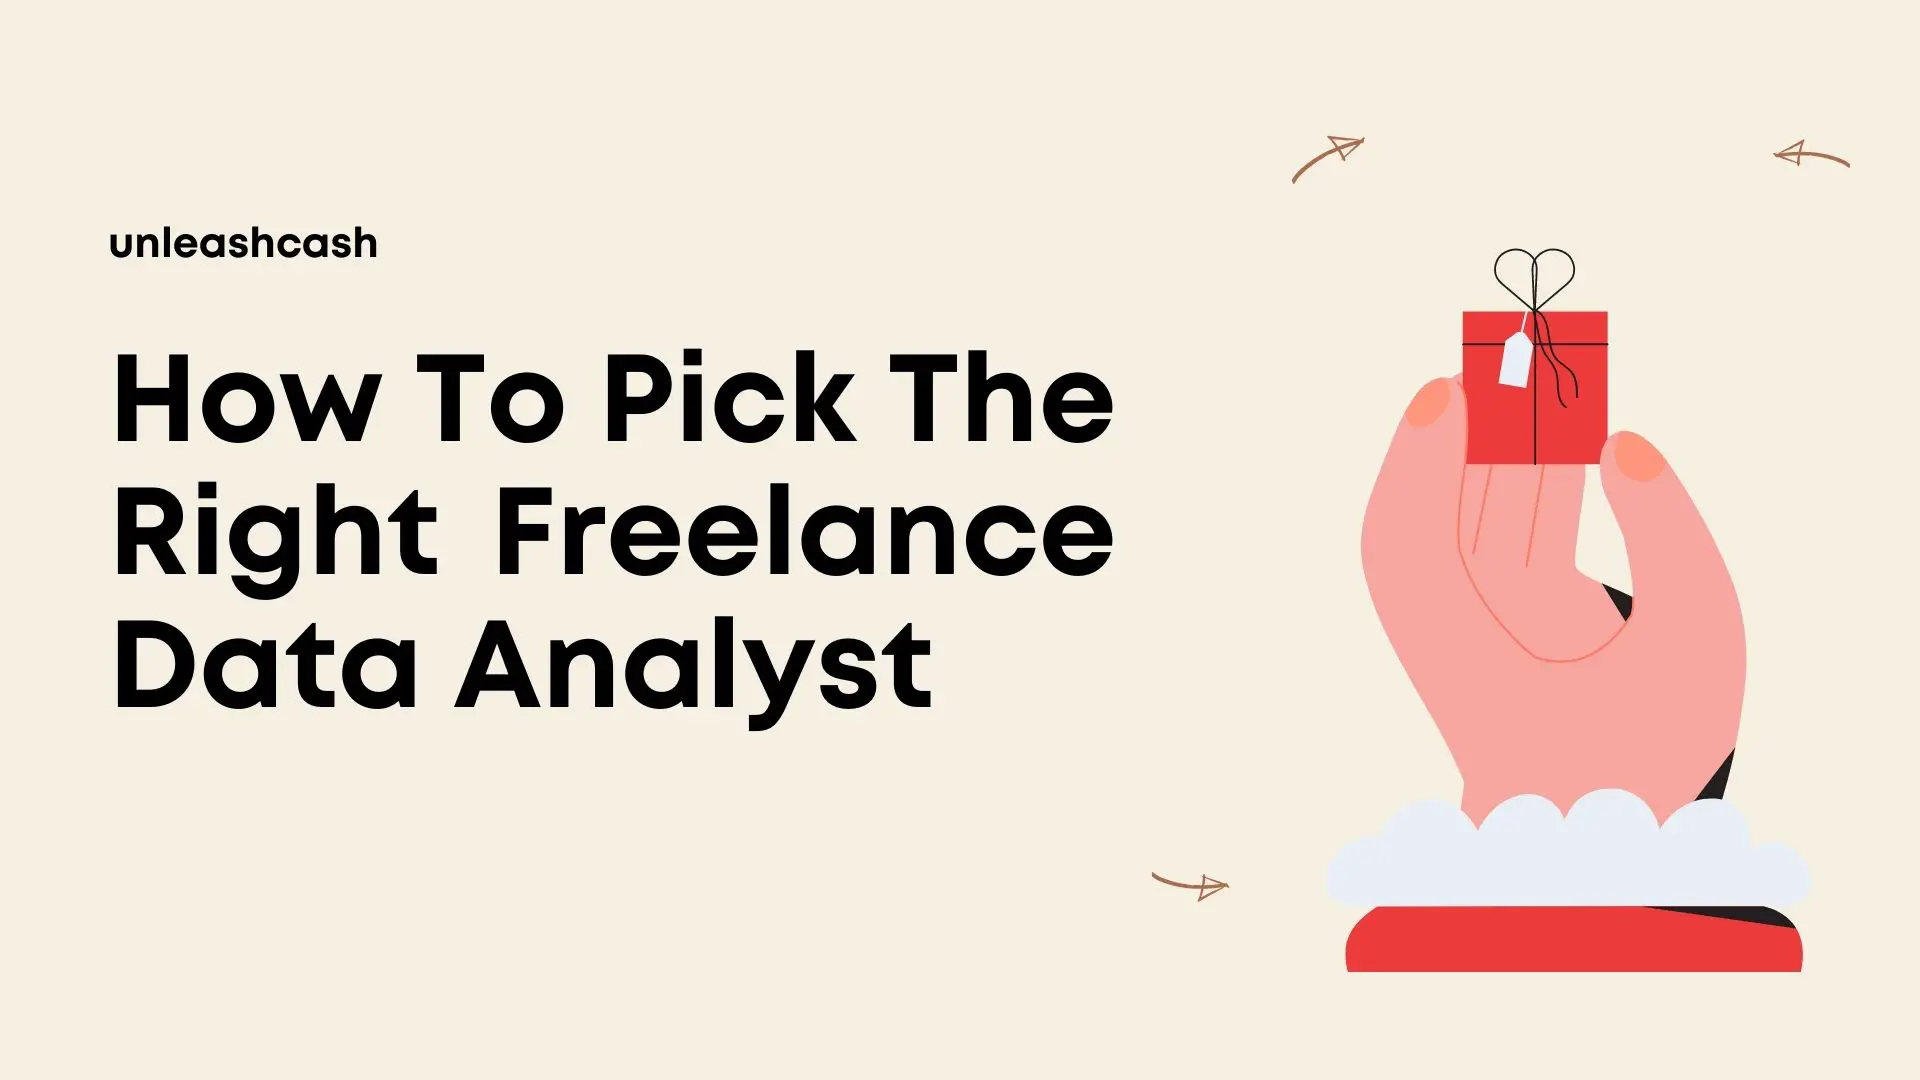 How To Pick The Right Freelance Data Analyst